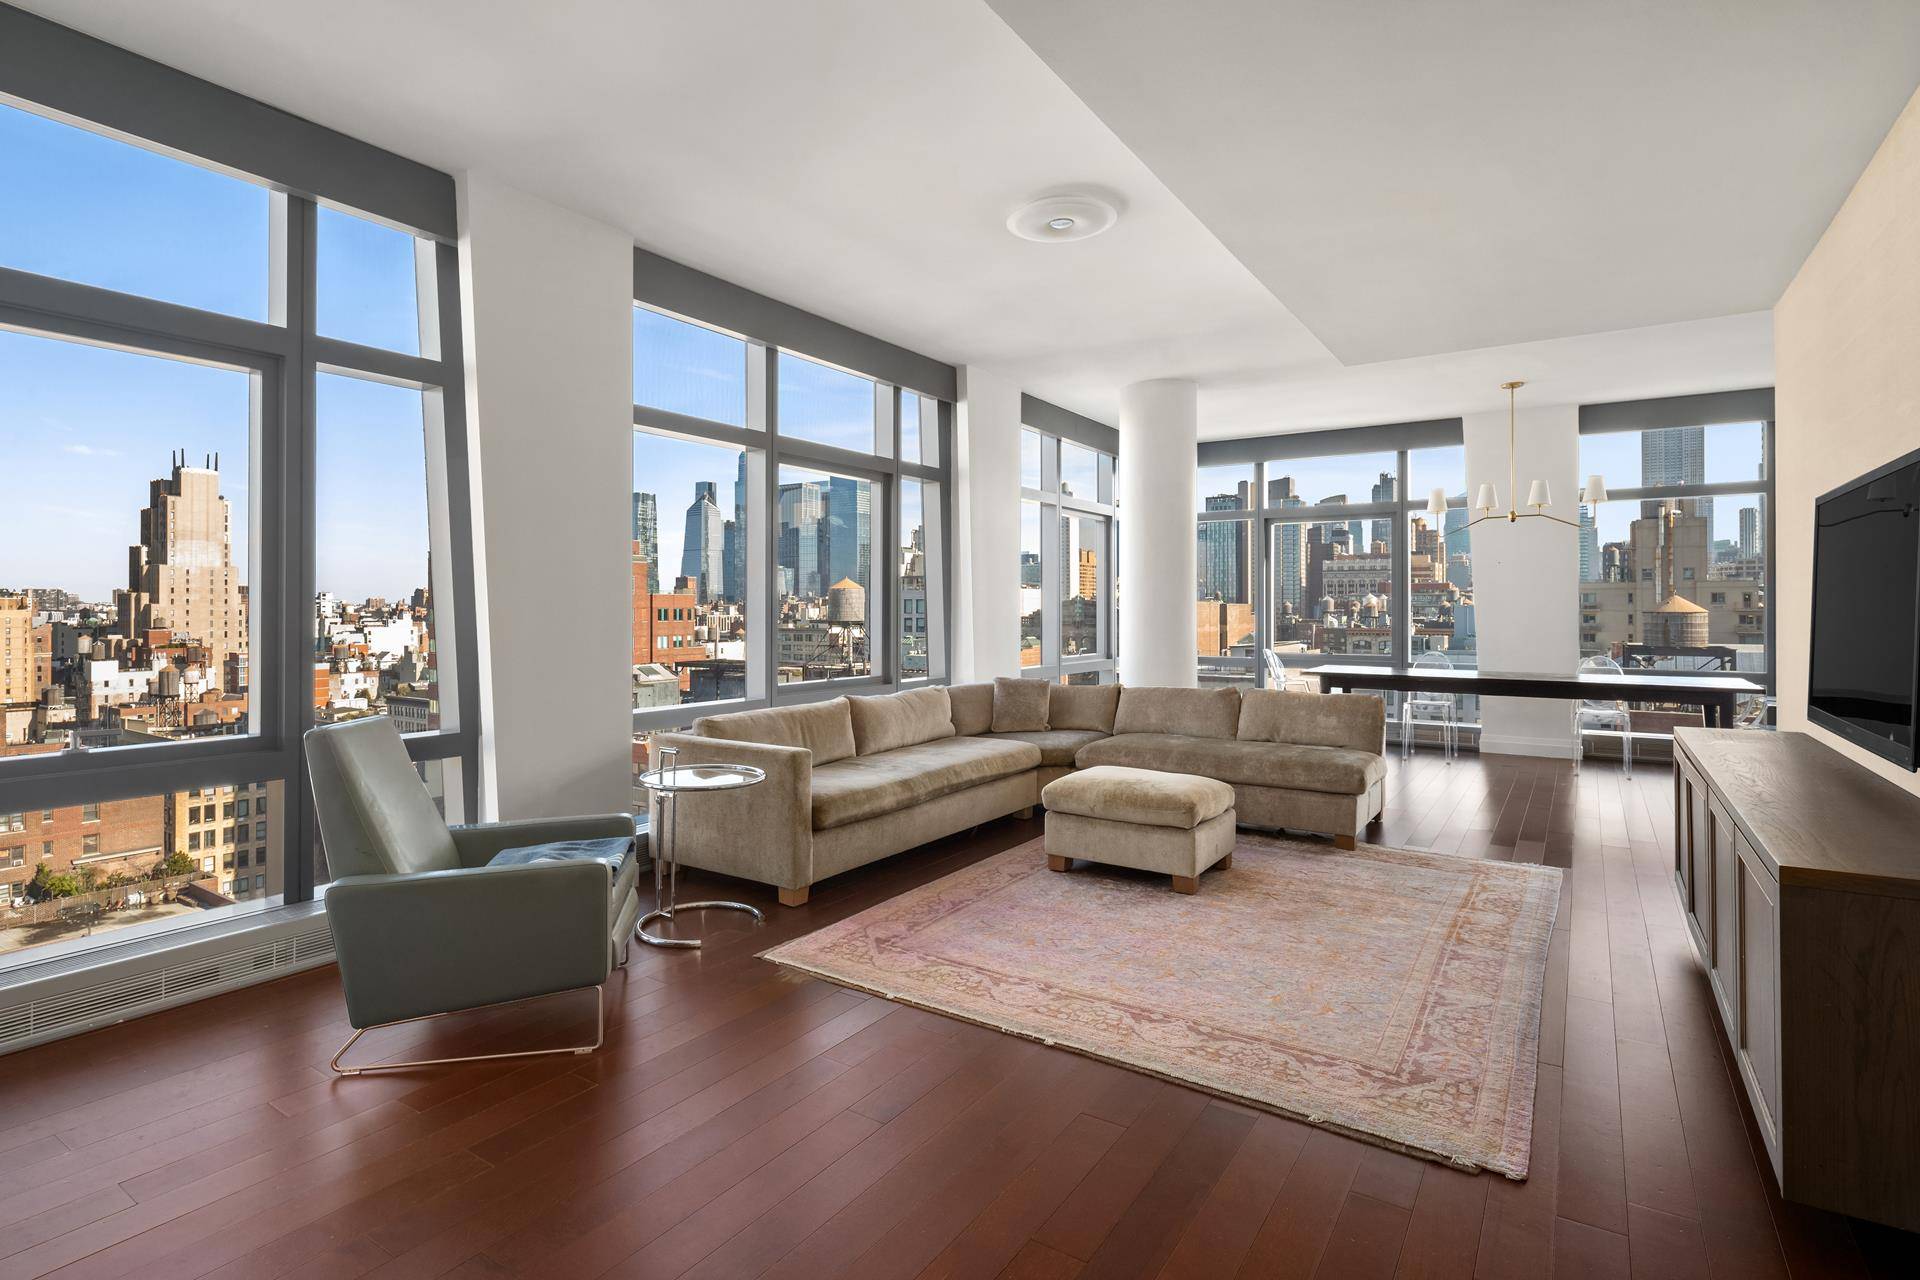 Expansive Loft in Full Service Building with views of the Empire State, Chrysler Building, and Hudson Yards.